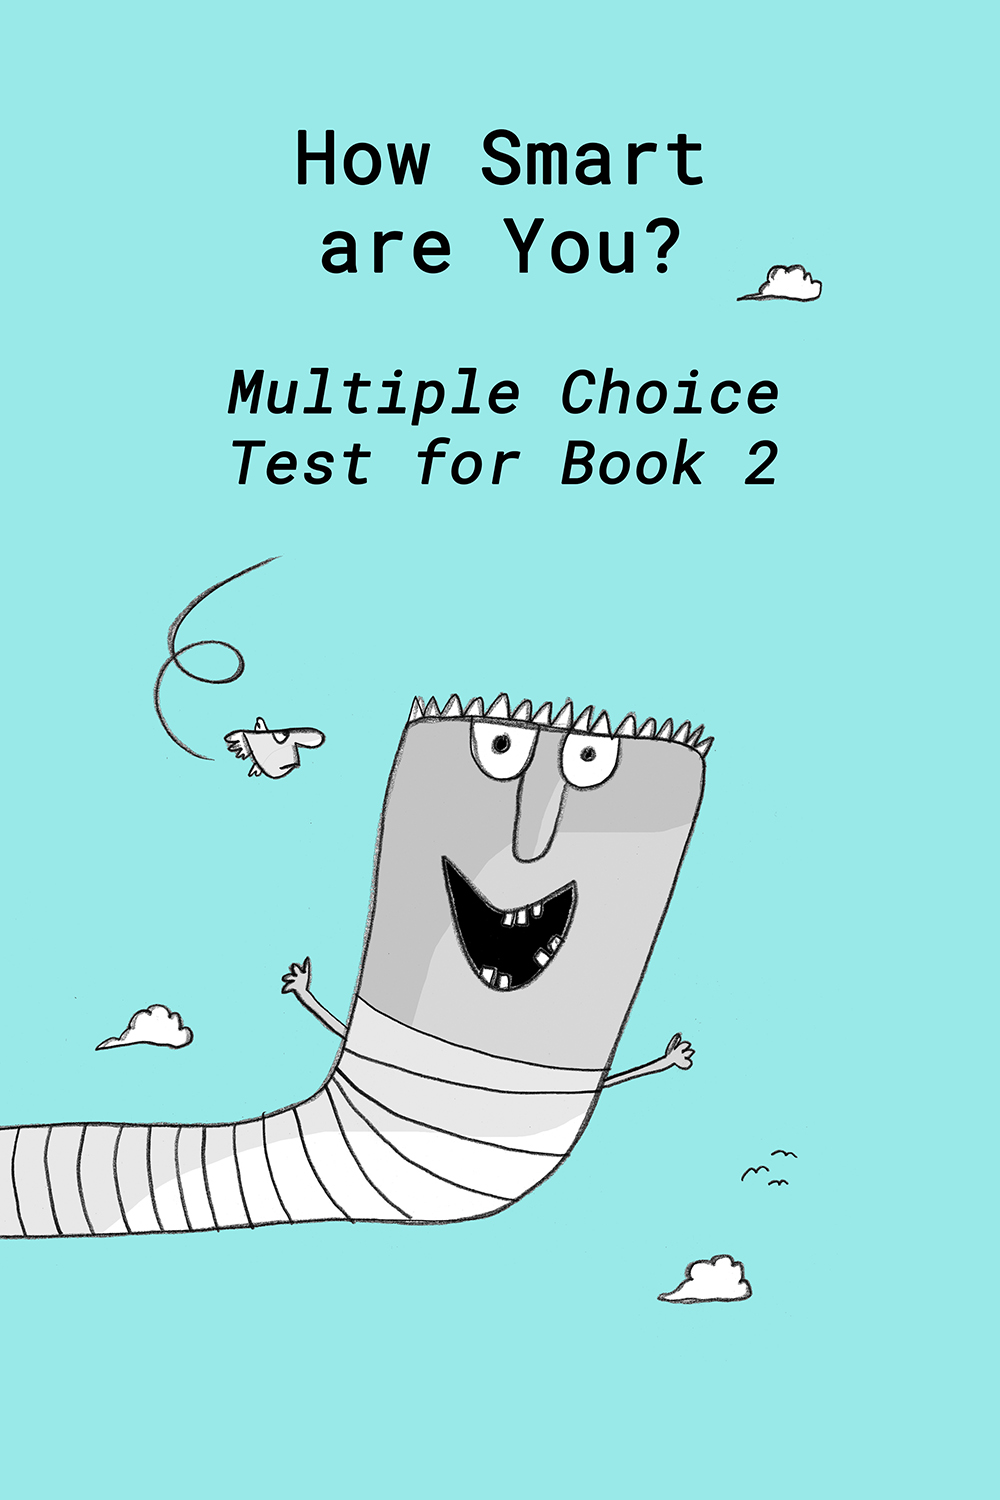 Multiple Choice for Book 2